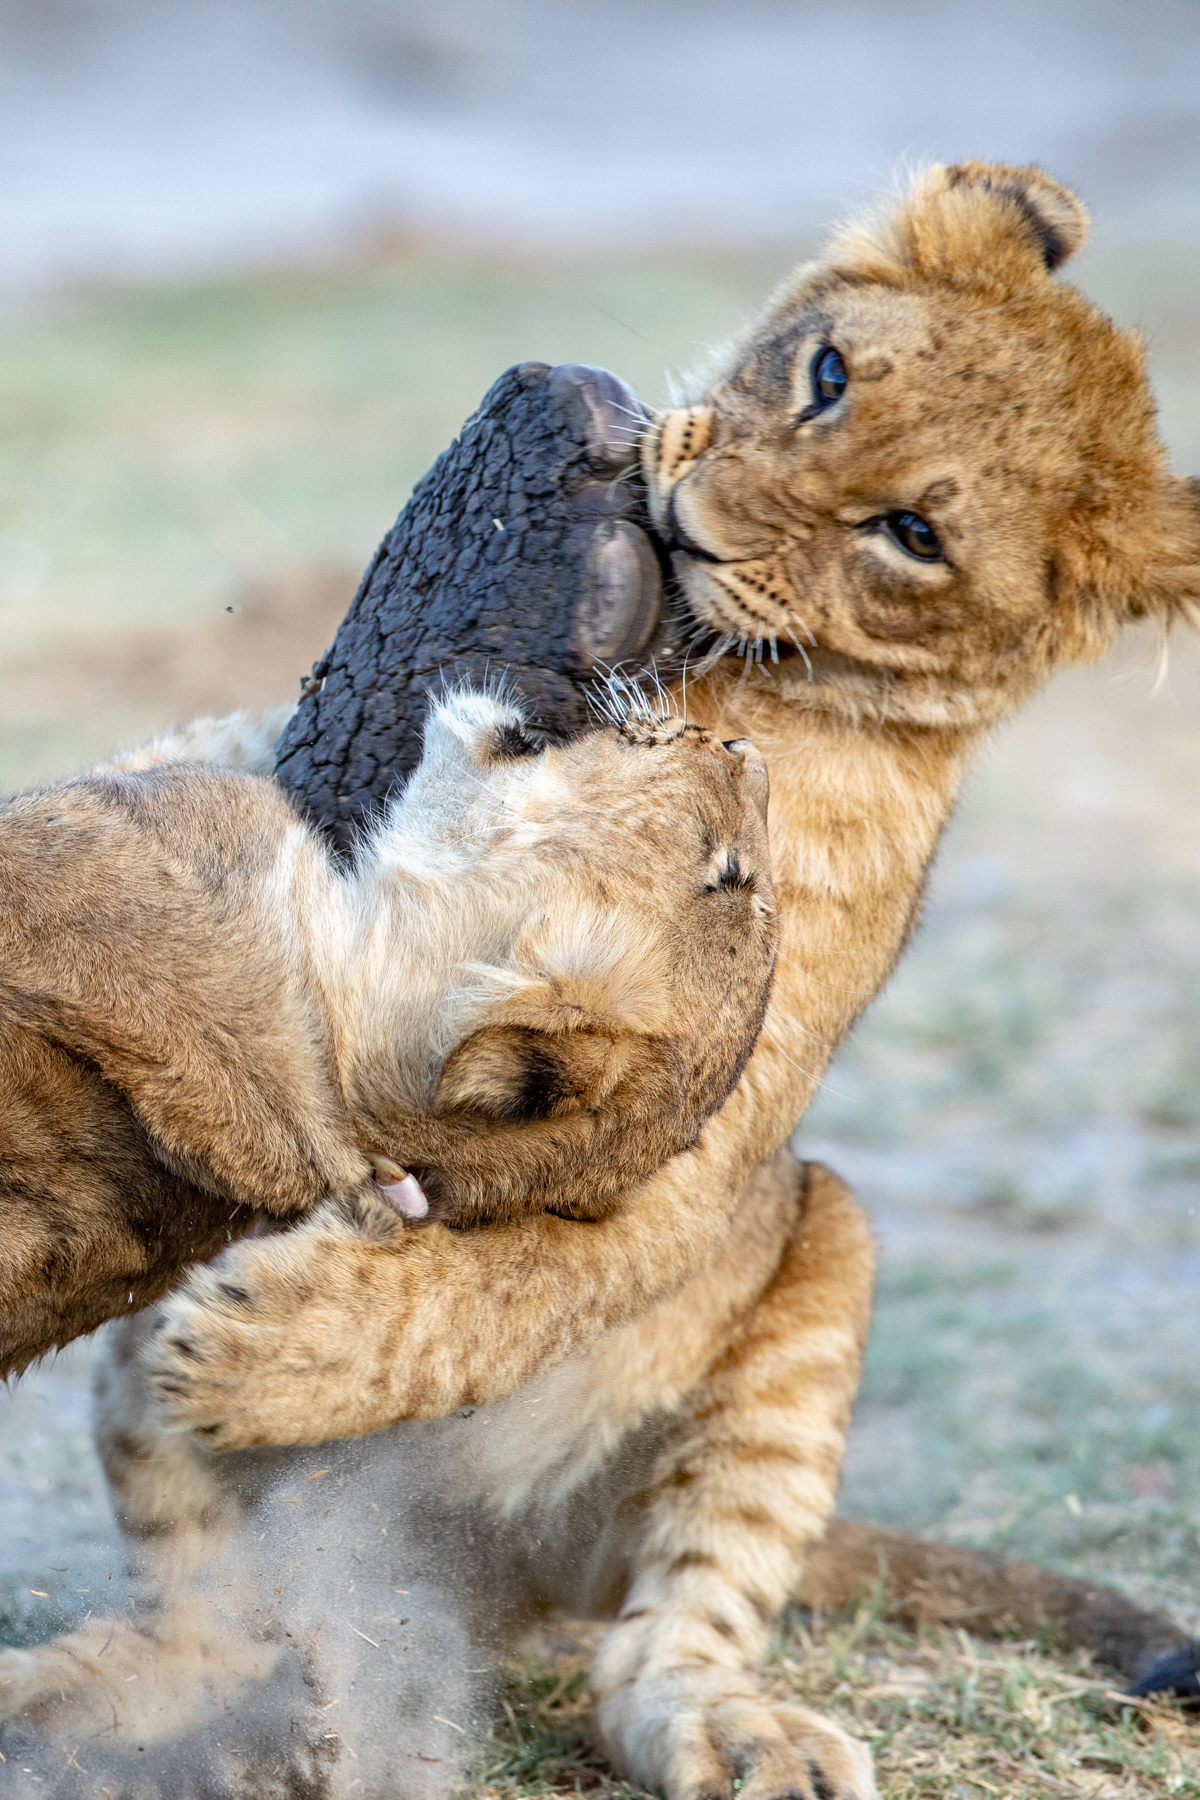 Lion cubs tussle over a baby elephant's foot at Savuti, Botswana